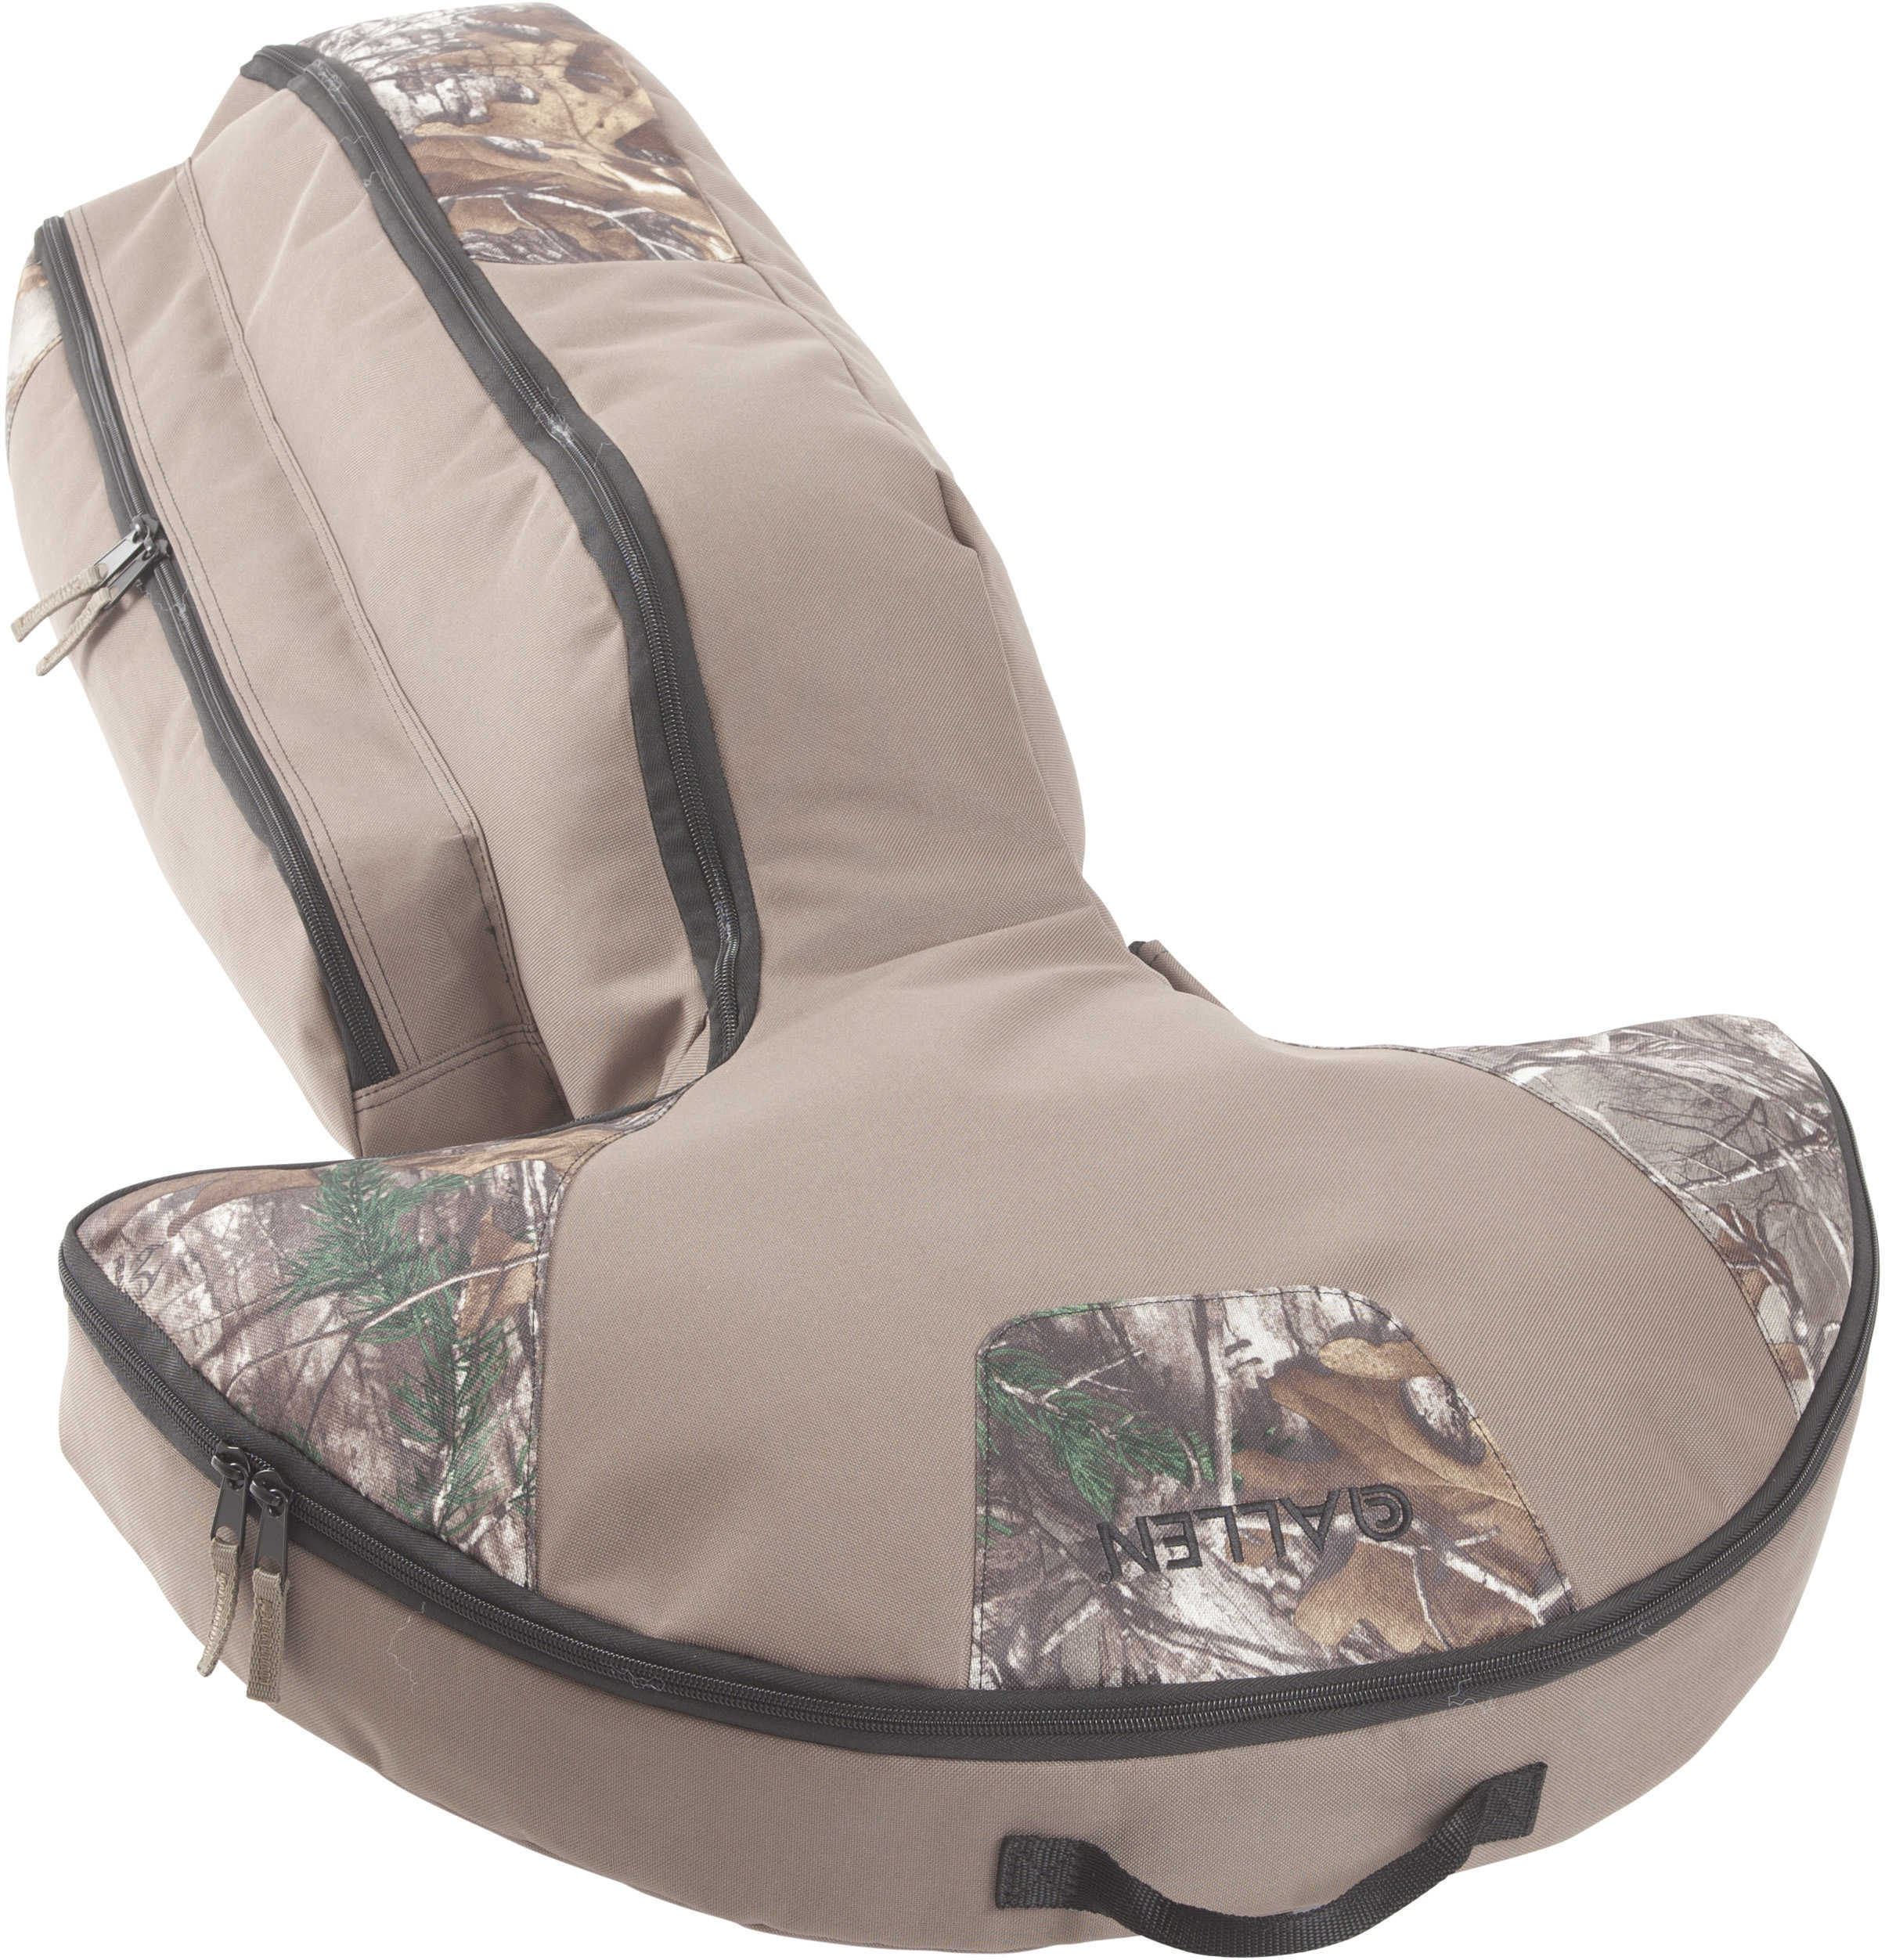 Allen Force Compact Crossbow Case Realtree Xtra/Tan Model: 6026